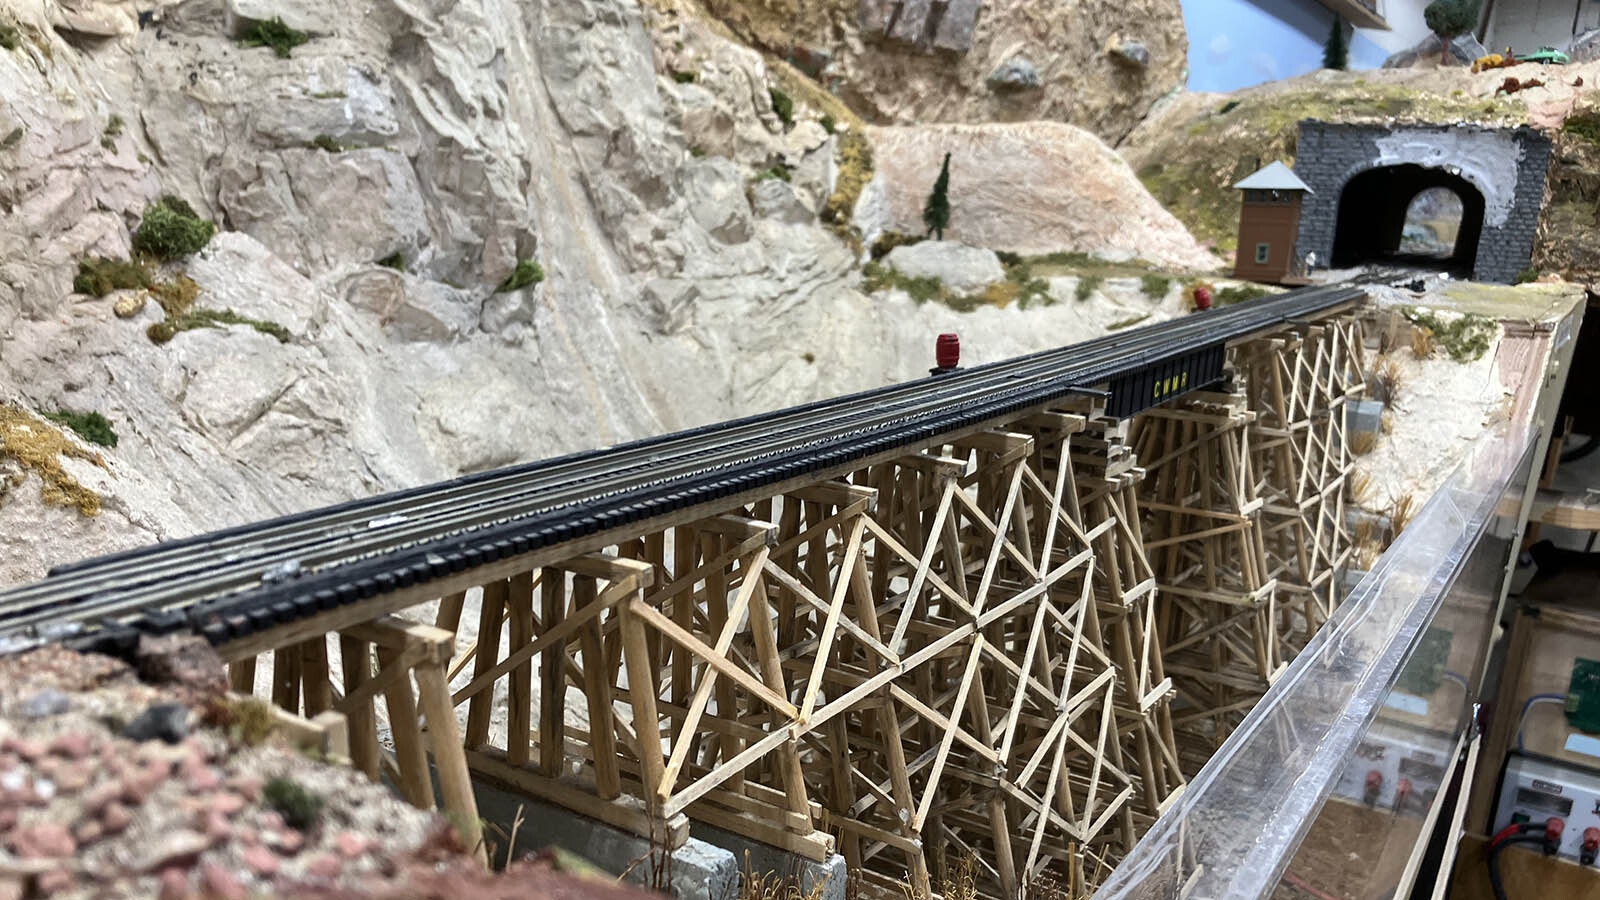 A former member of the club hand-made this timber bridge that stretches across a chasm on the model railroad club’s HO layout.